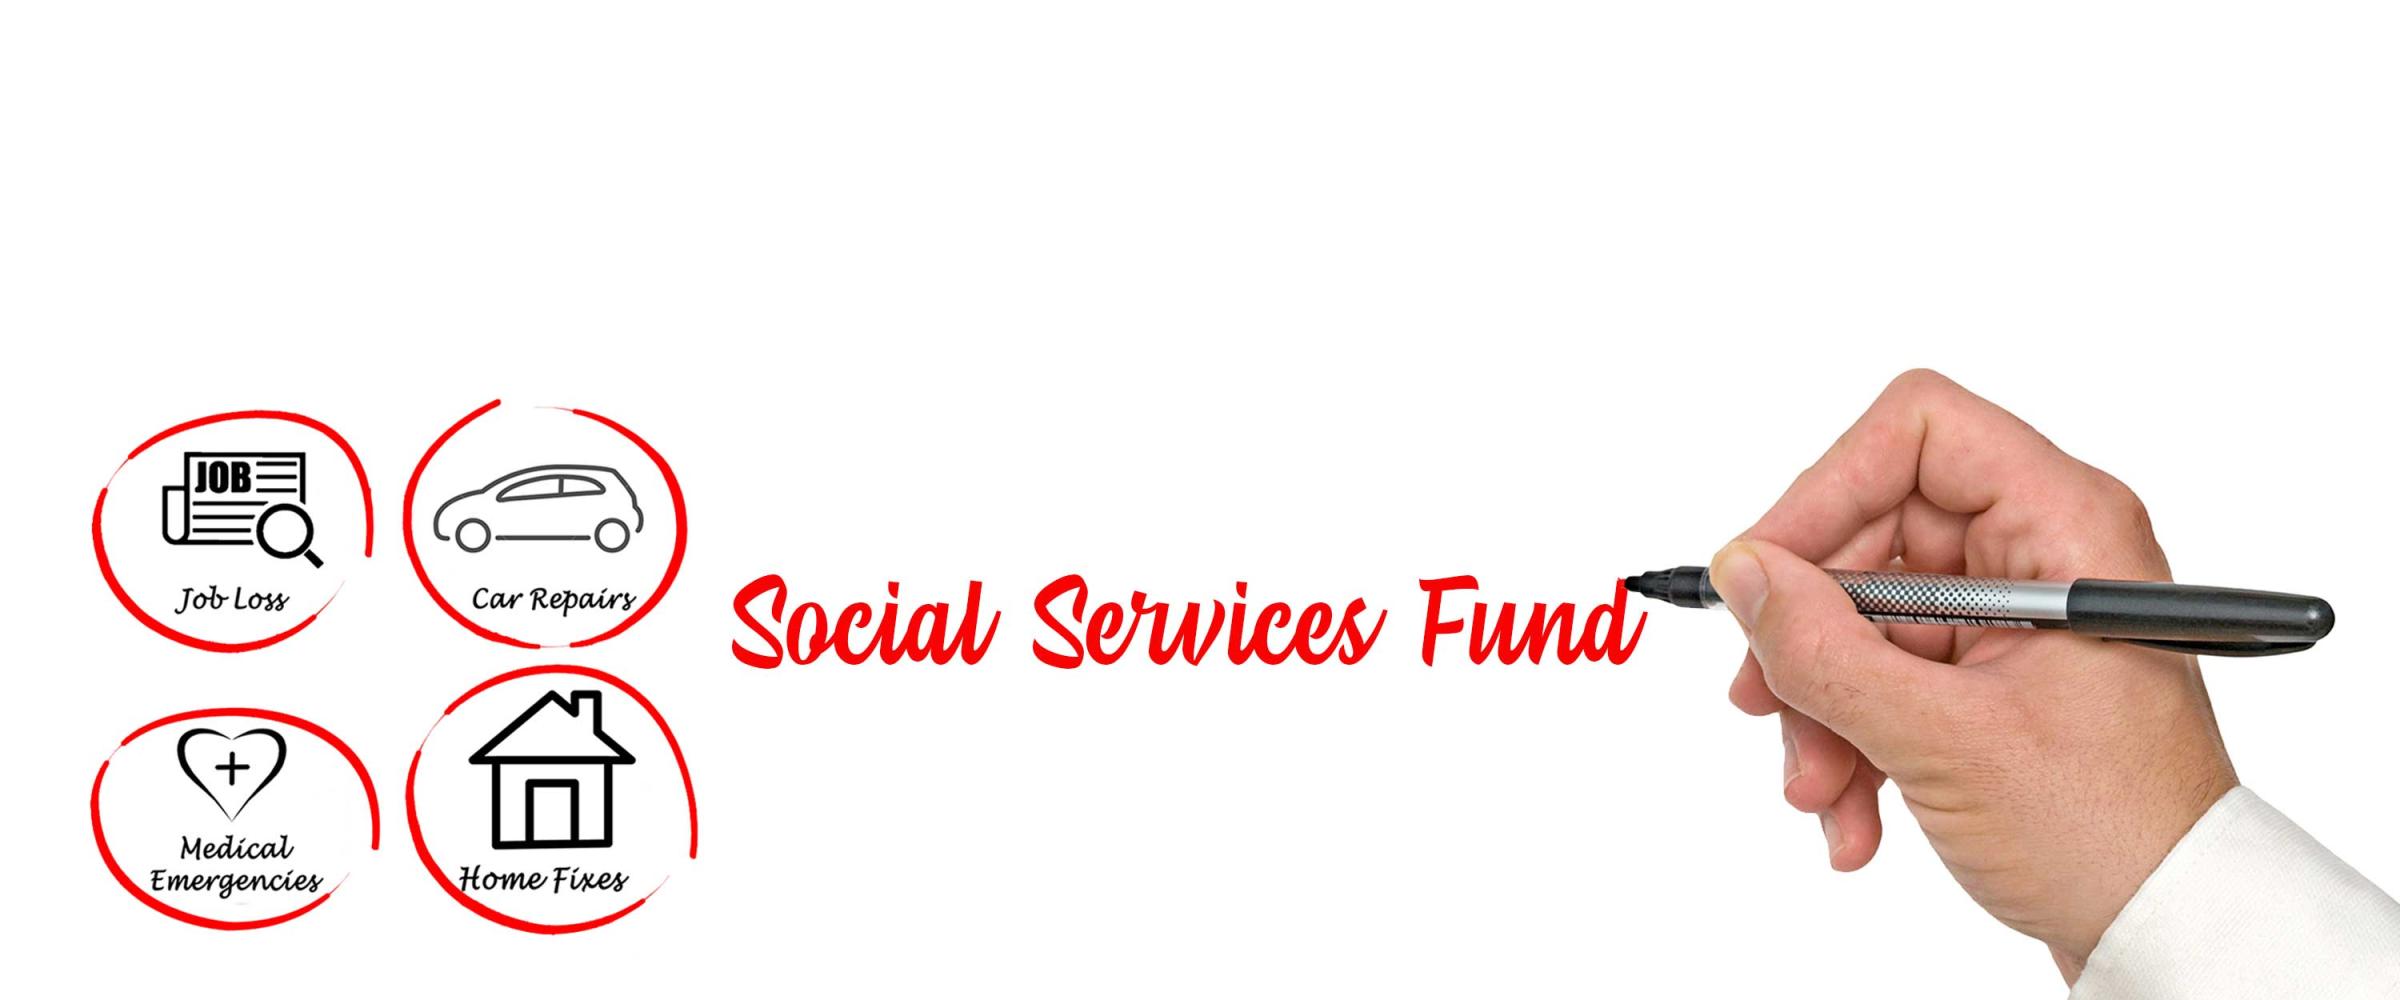 Social Services Fund